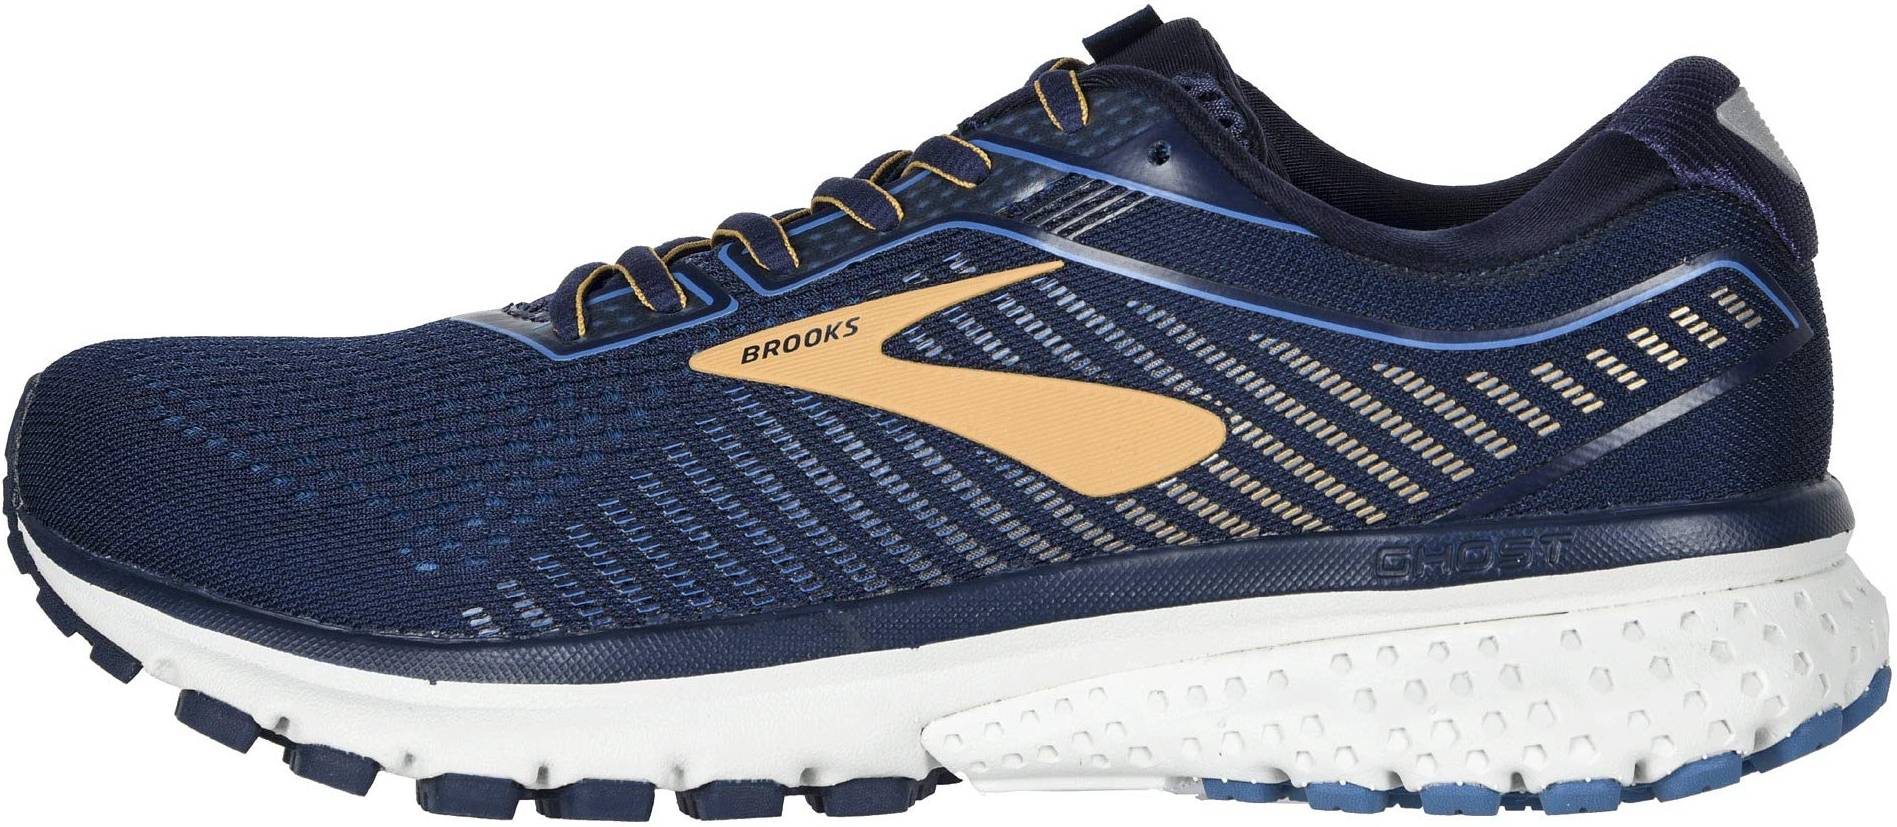 Save 46% on Blue Running Shoes (760 